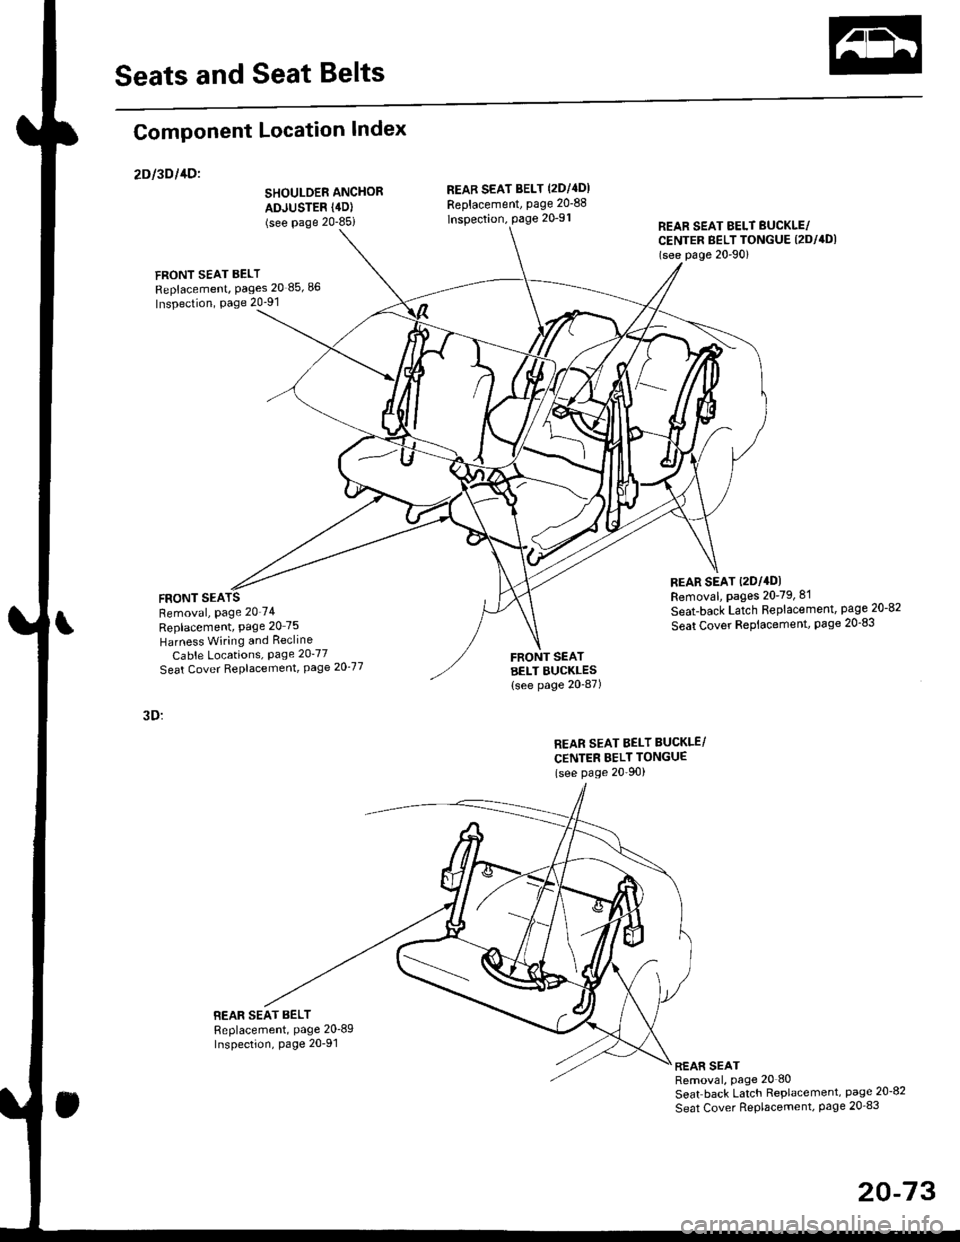 HONDA CIVIC 1999 6.G Workshop Manual Seats and Seat Belts
Component Location Index
2Dl3Dl1Dl
SHOULDER ANCHOR
ADJUSTER (4D)
(see Page 20-85i
FRONT SEAT BELT
Replacement, Pages 20 85,86
Inspection, Page 20-91
FRONT SEARemoval, Page 2074
R